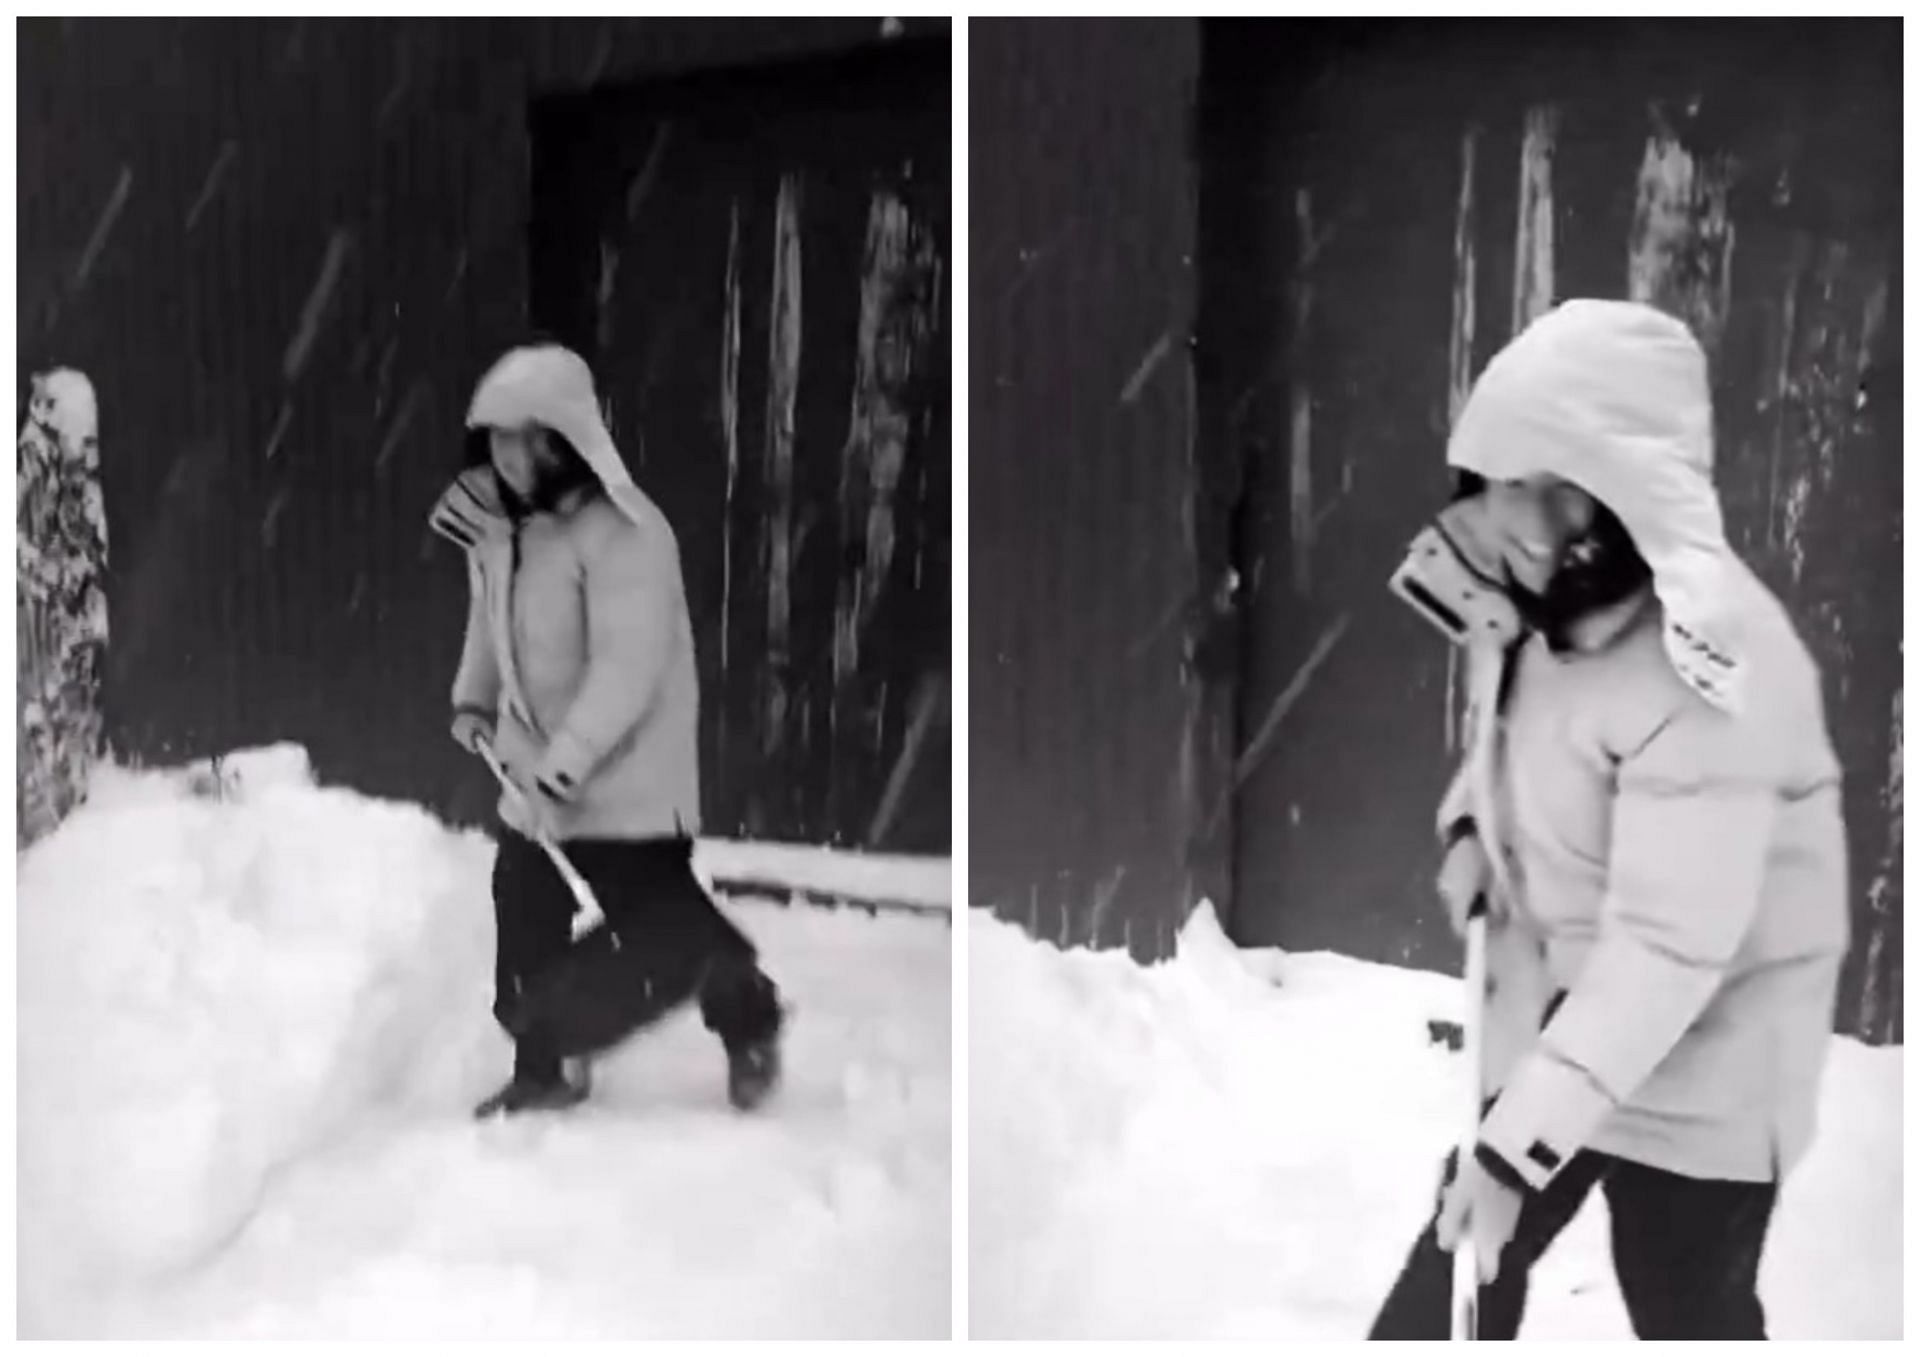 Viktor Hovland trying to clean snow at his home on Christmas Eve (image via Instagram.com/mats_hovland)